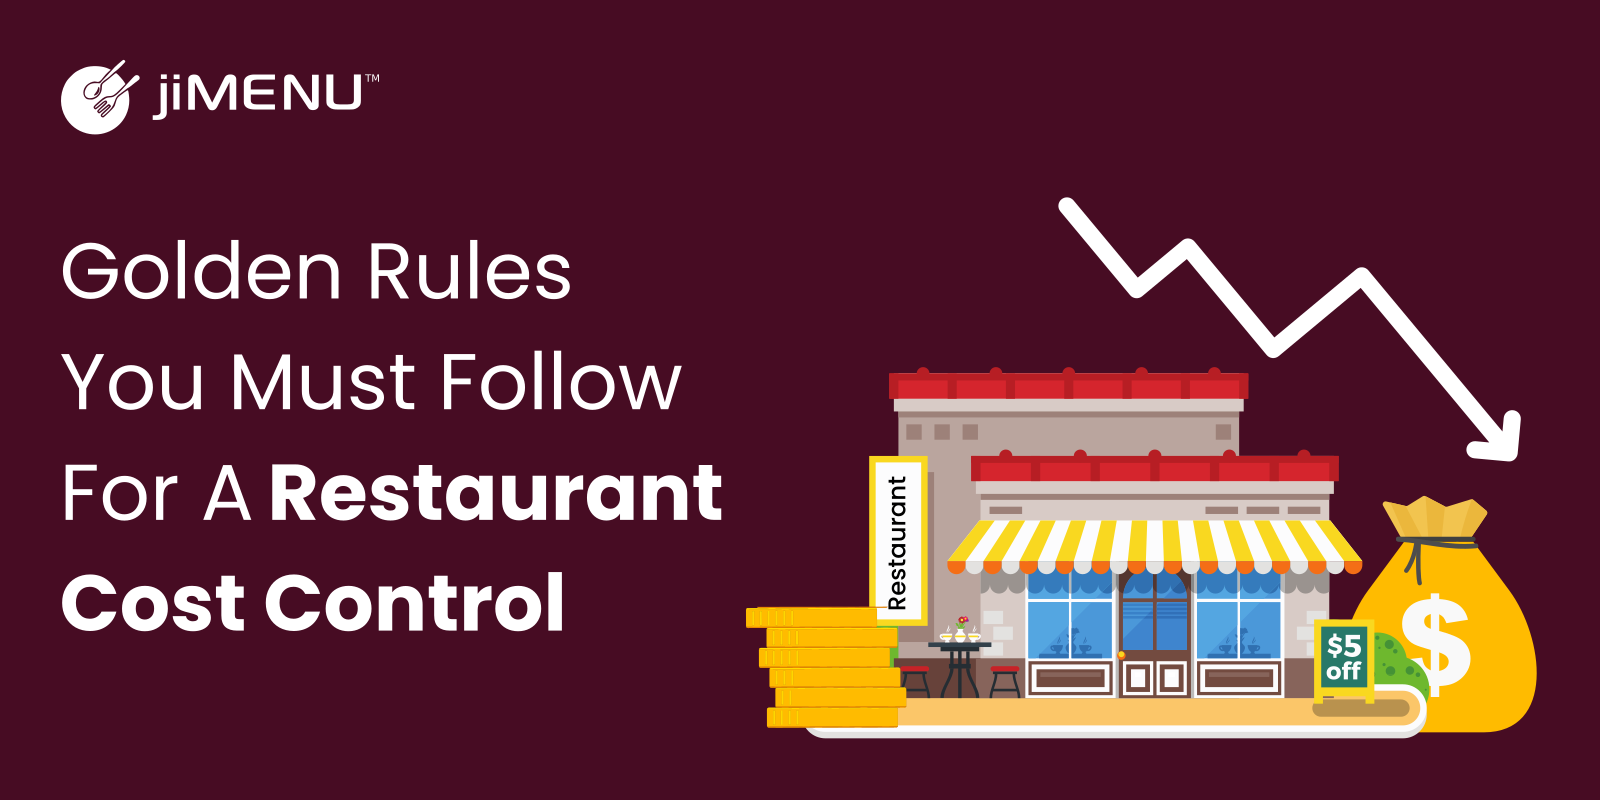 Golden Rules You Must Follow For A Restaurant Cost Control